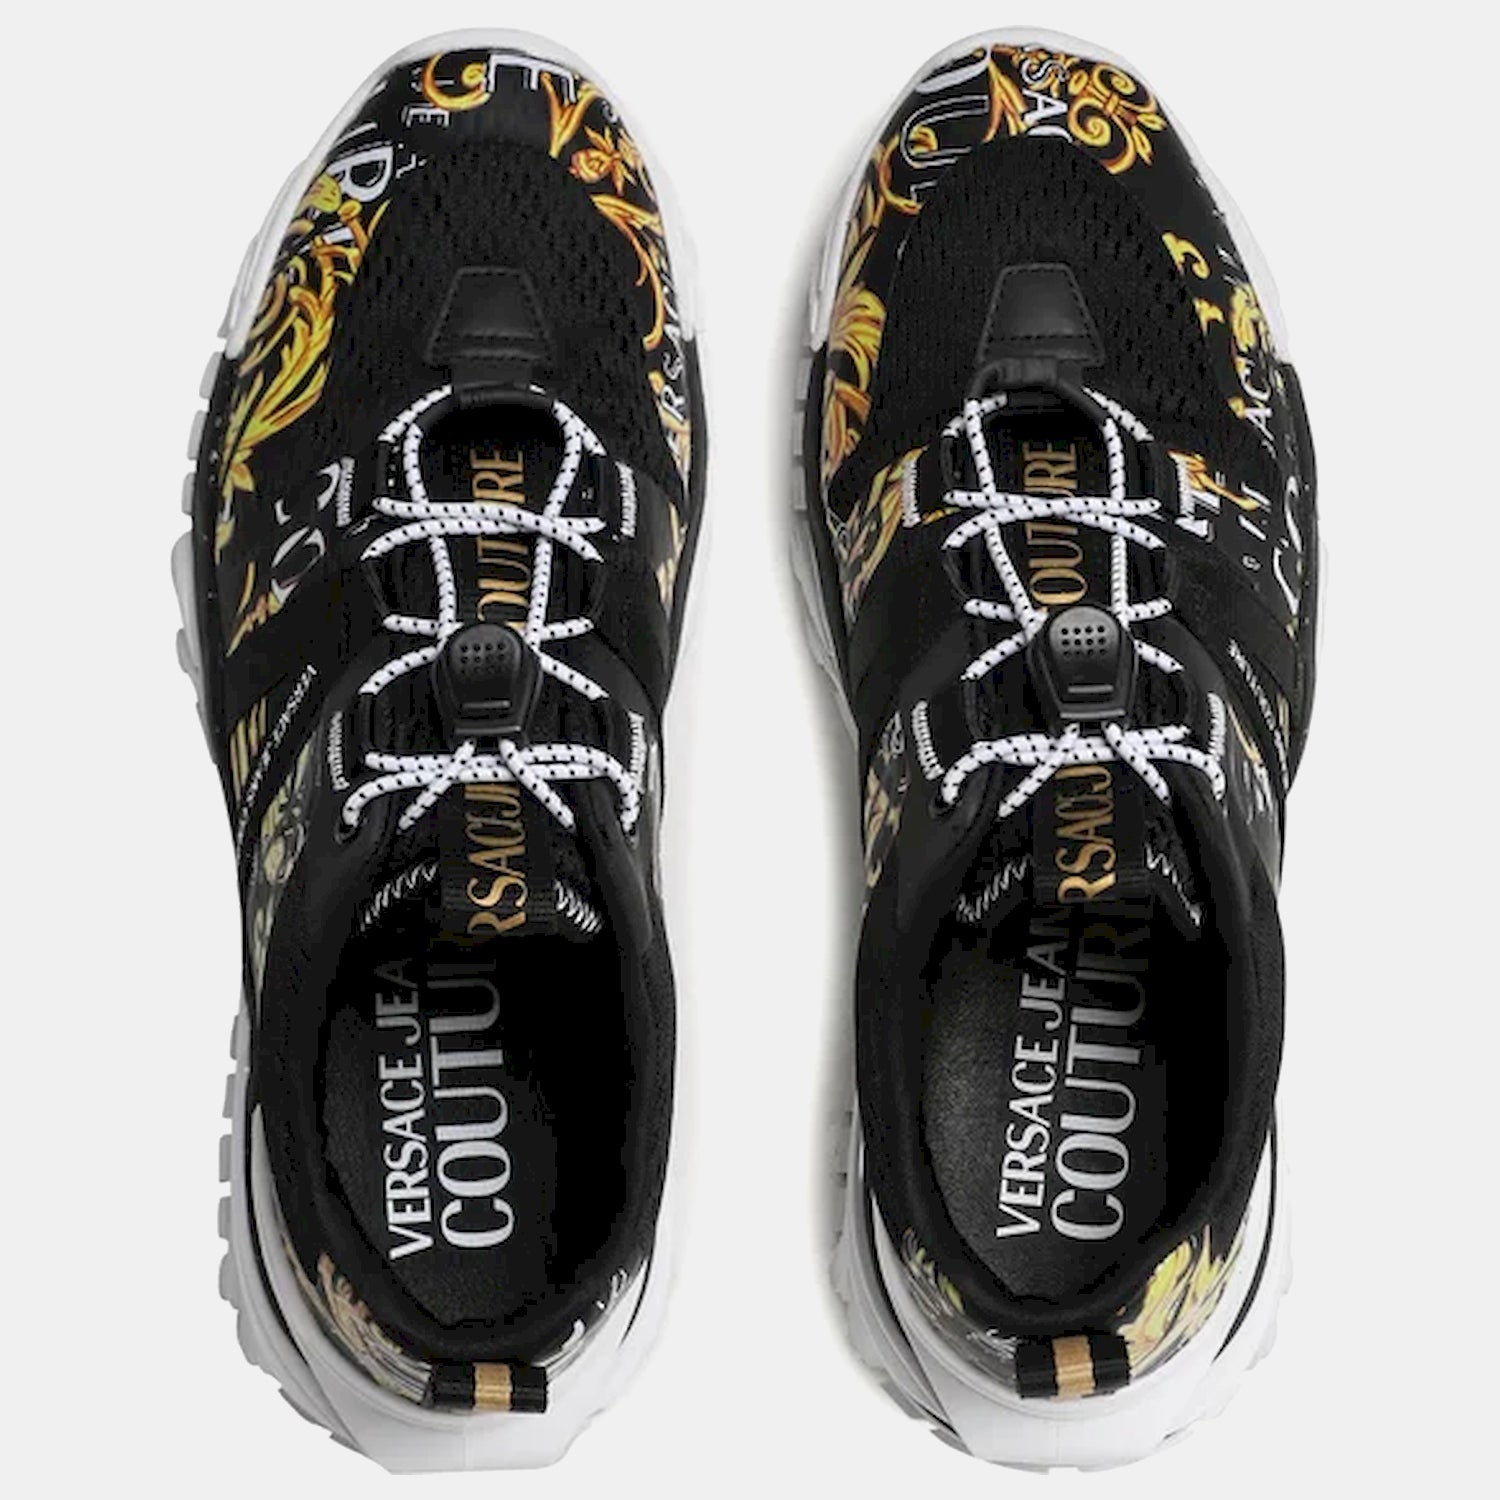 Versace Sapatilhas Sneakers Shoes 74ya3si7 Blk Gold Preto Ouro_shot3